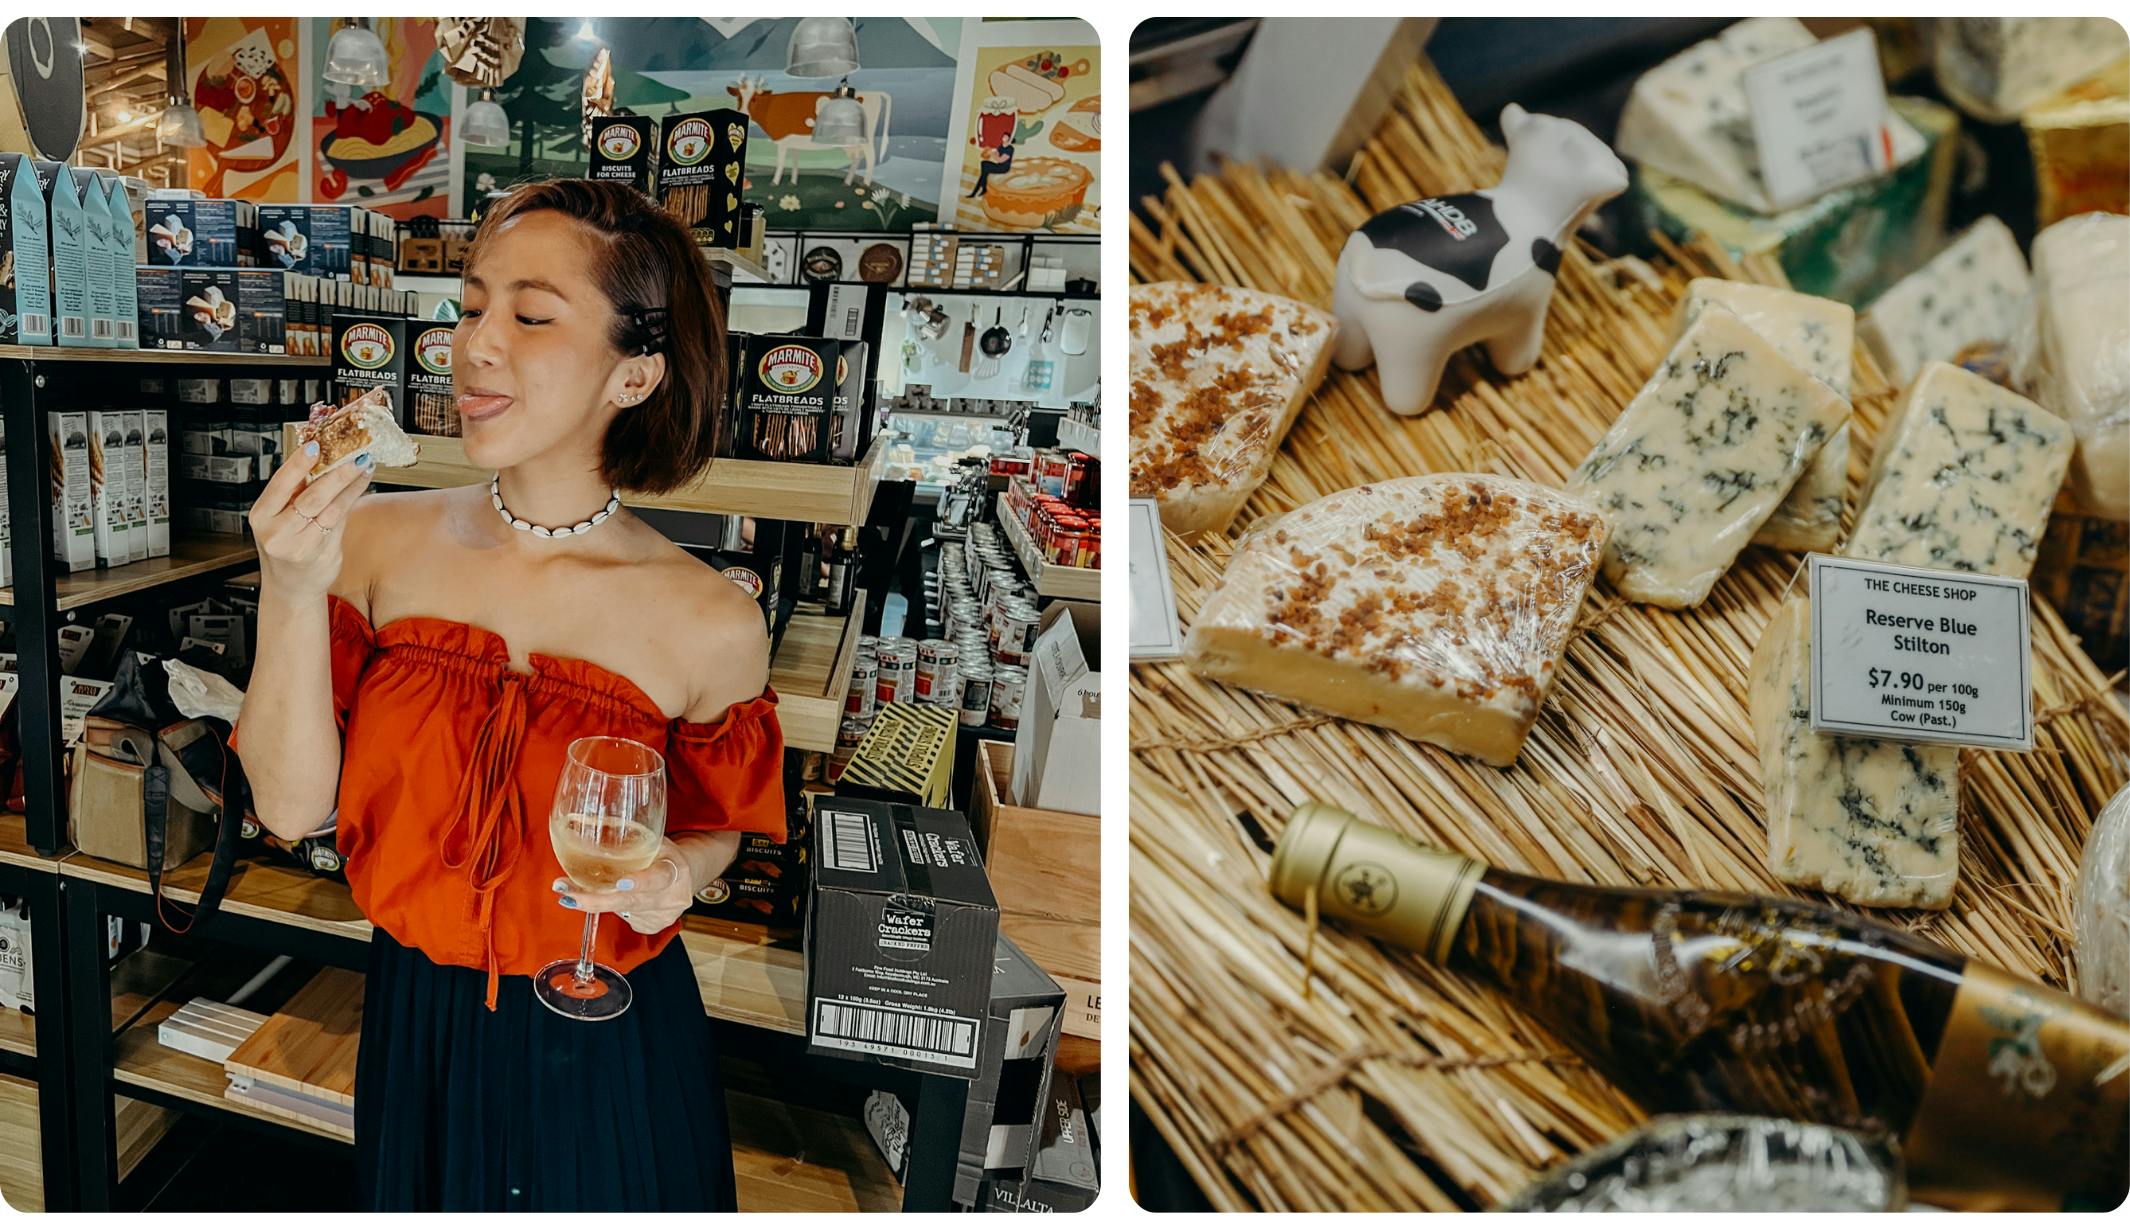 Enjoy free flow cheese and wine at Singapore's cheese artisan shop!